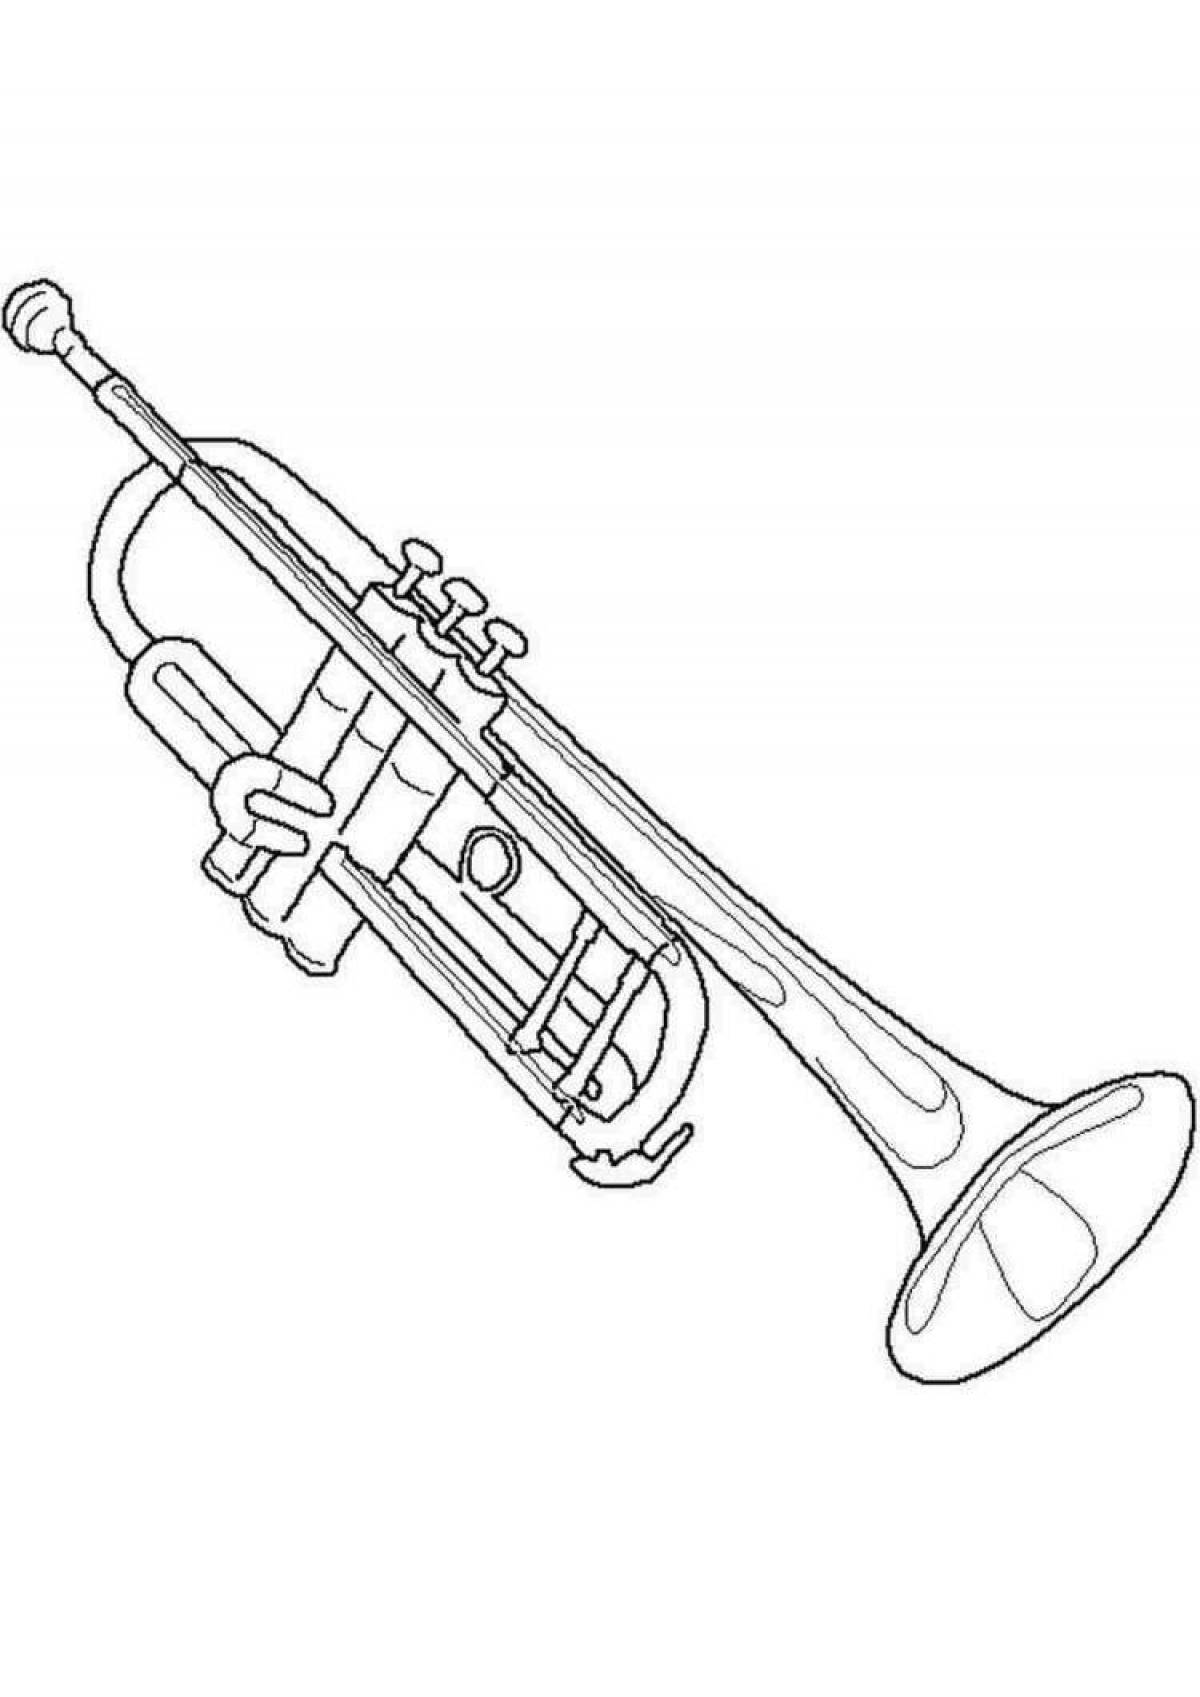 A wonderful trumpet coloring for kids